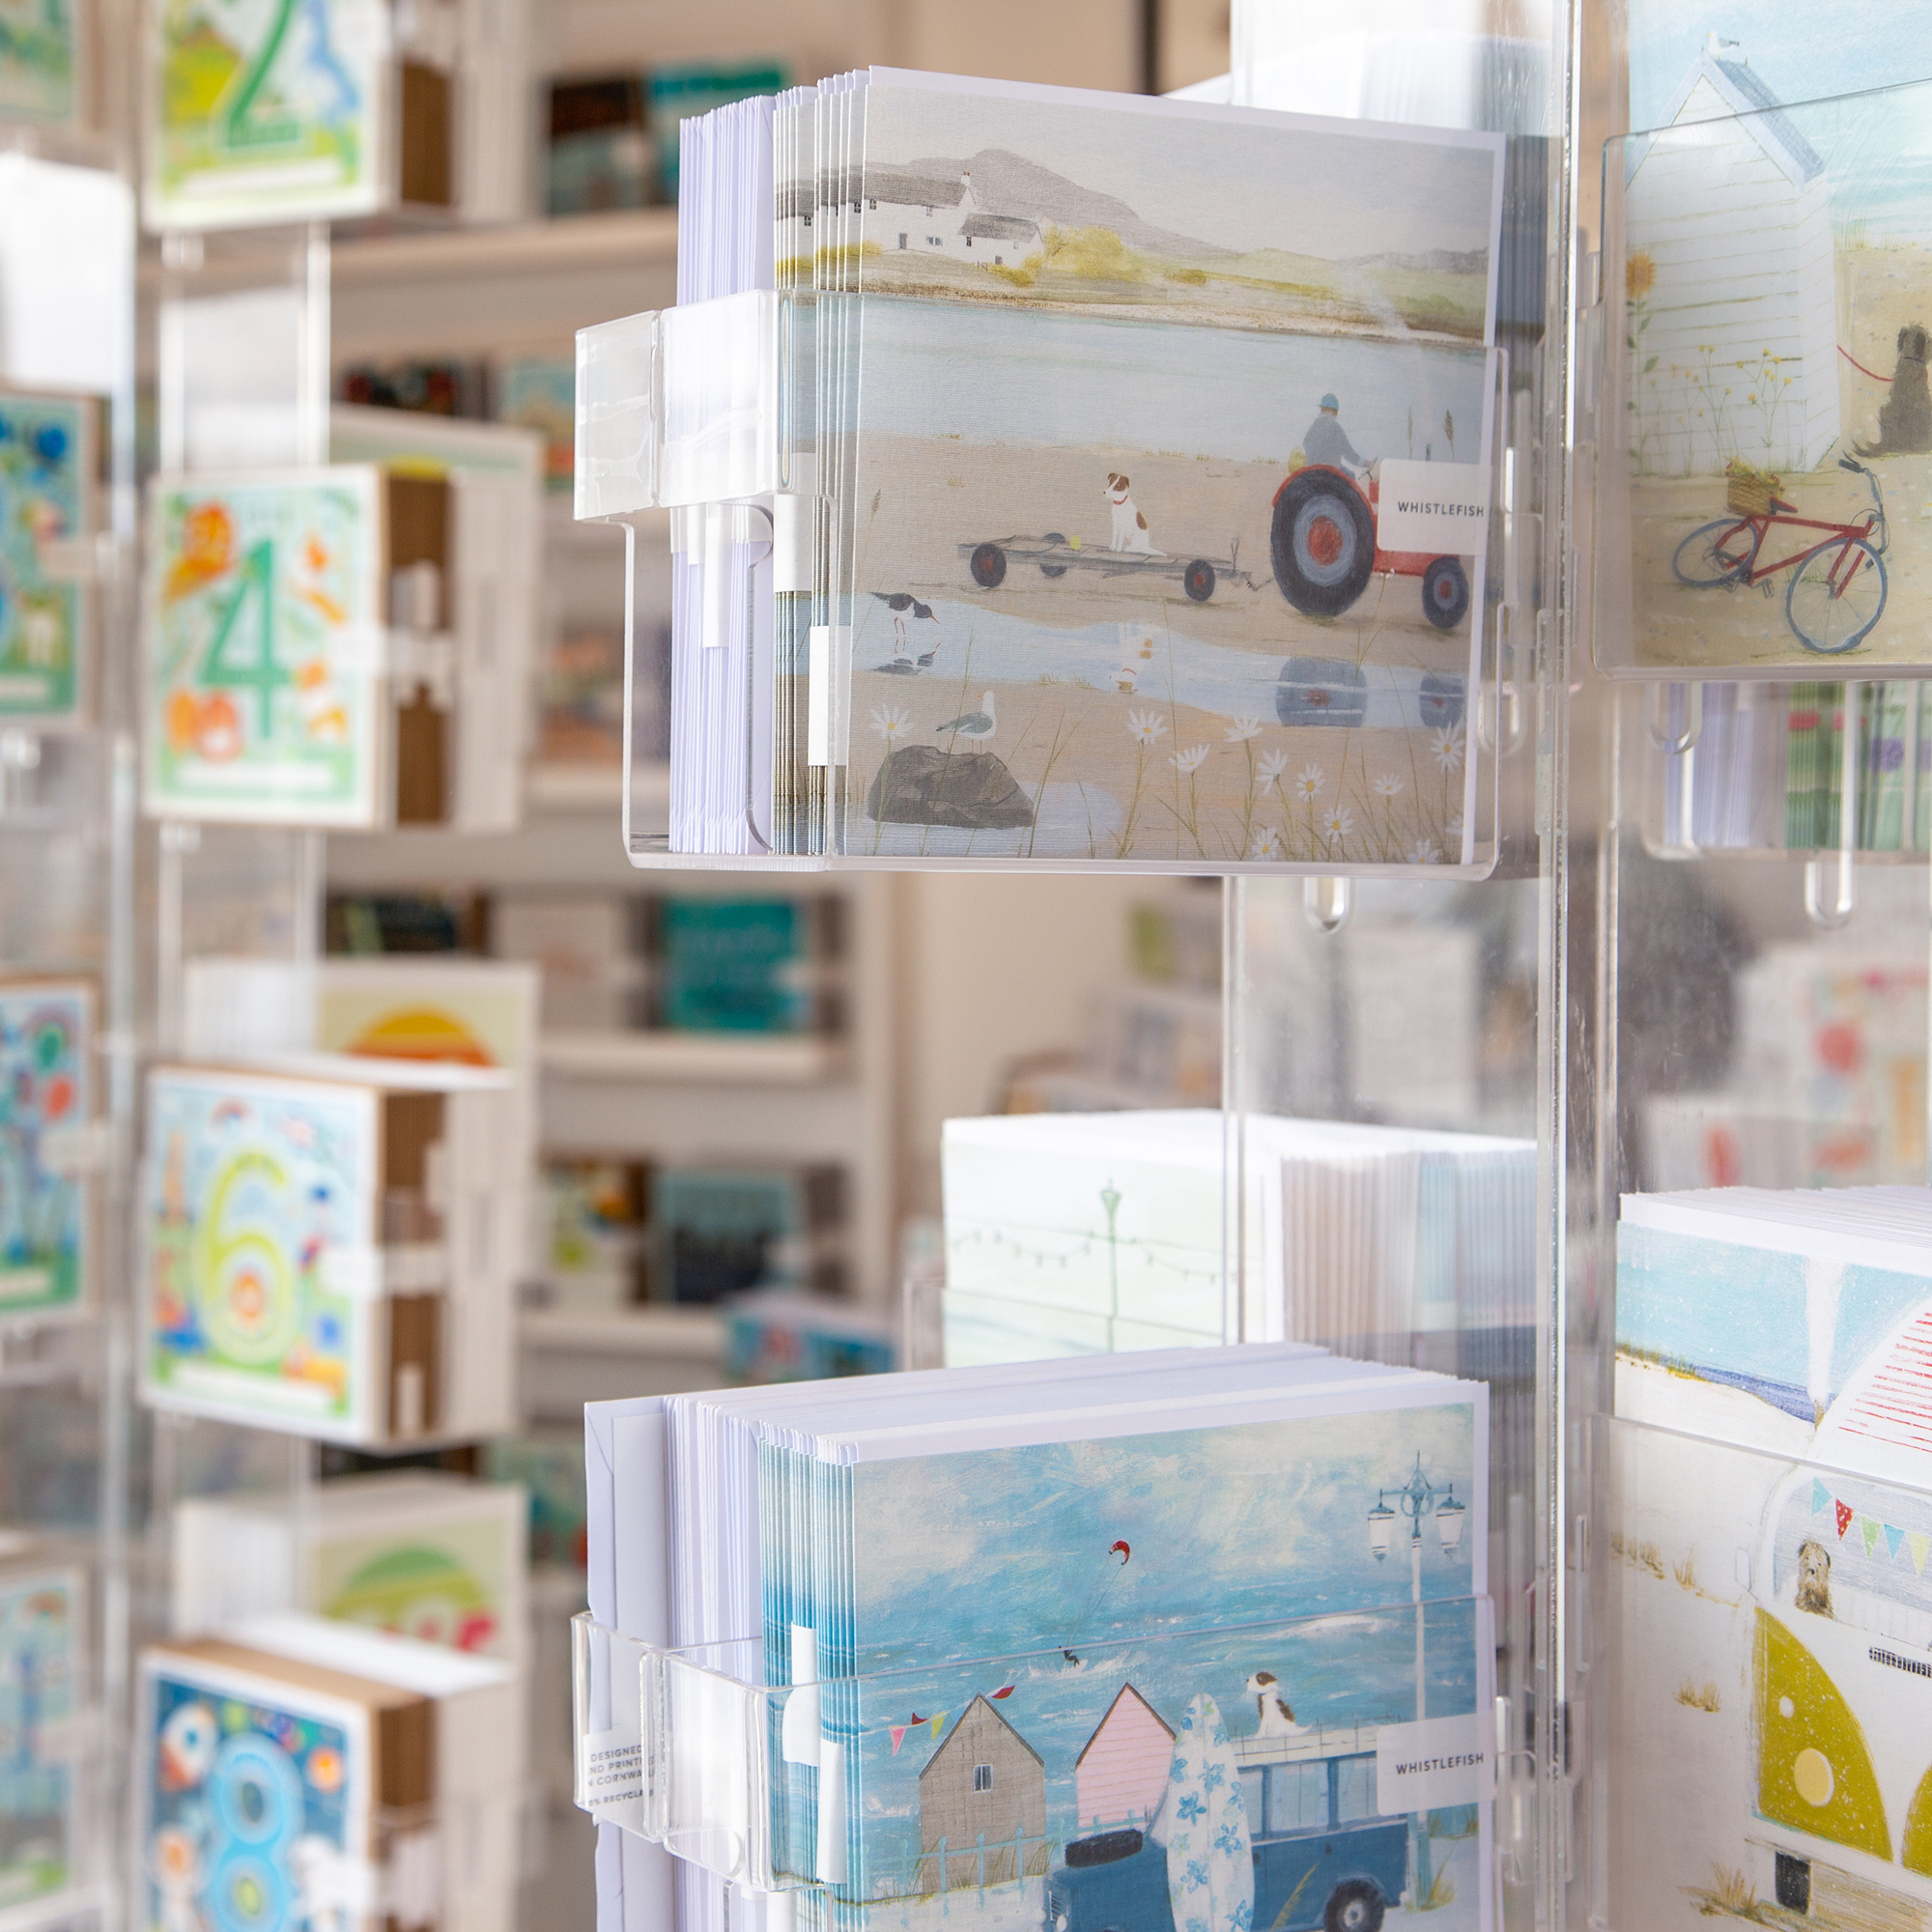 St Ives Gallery - Cards & Gifts